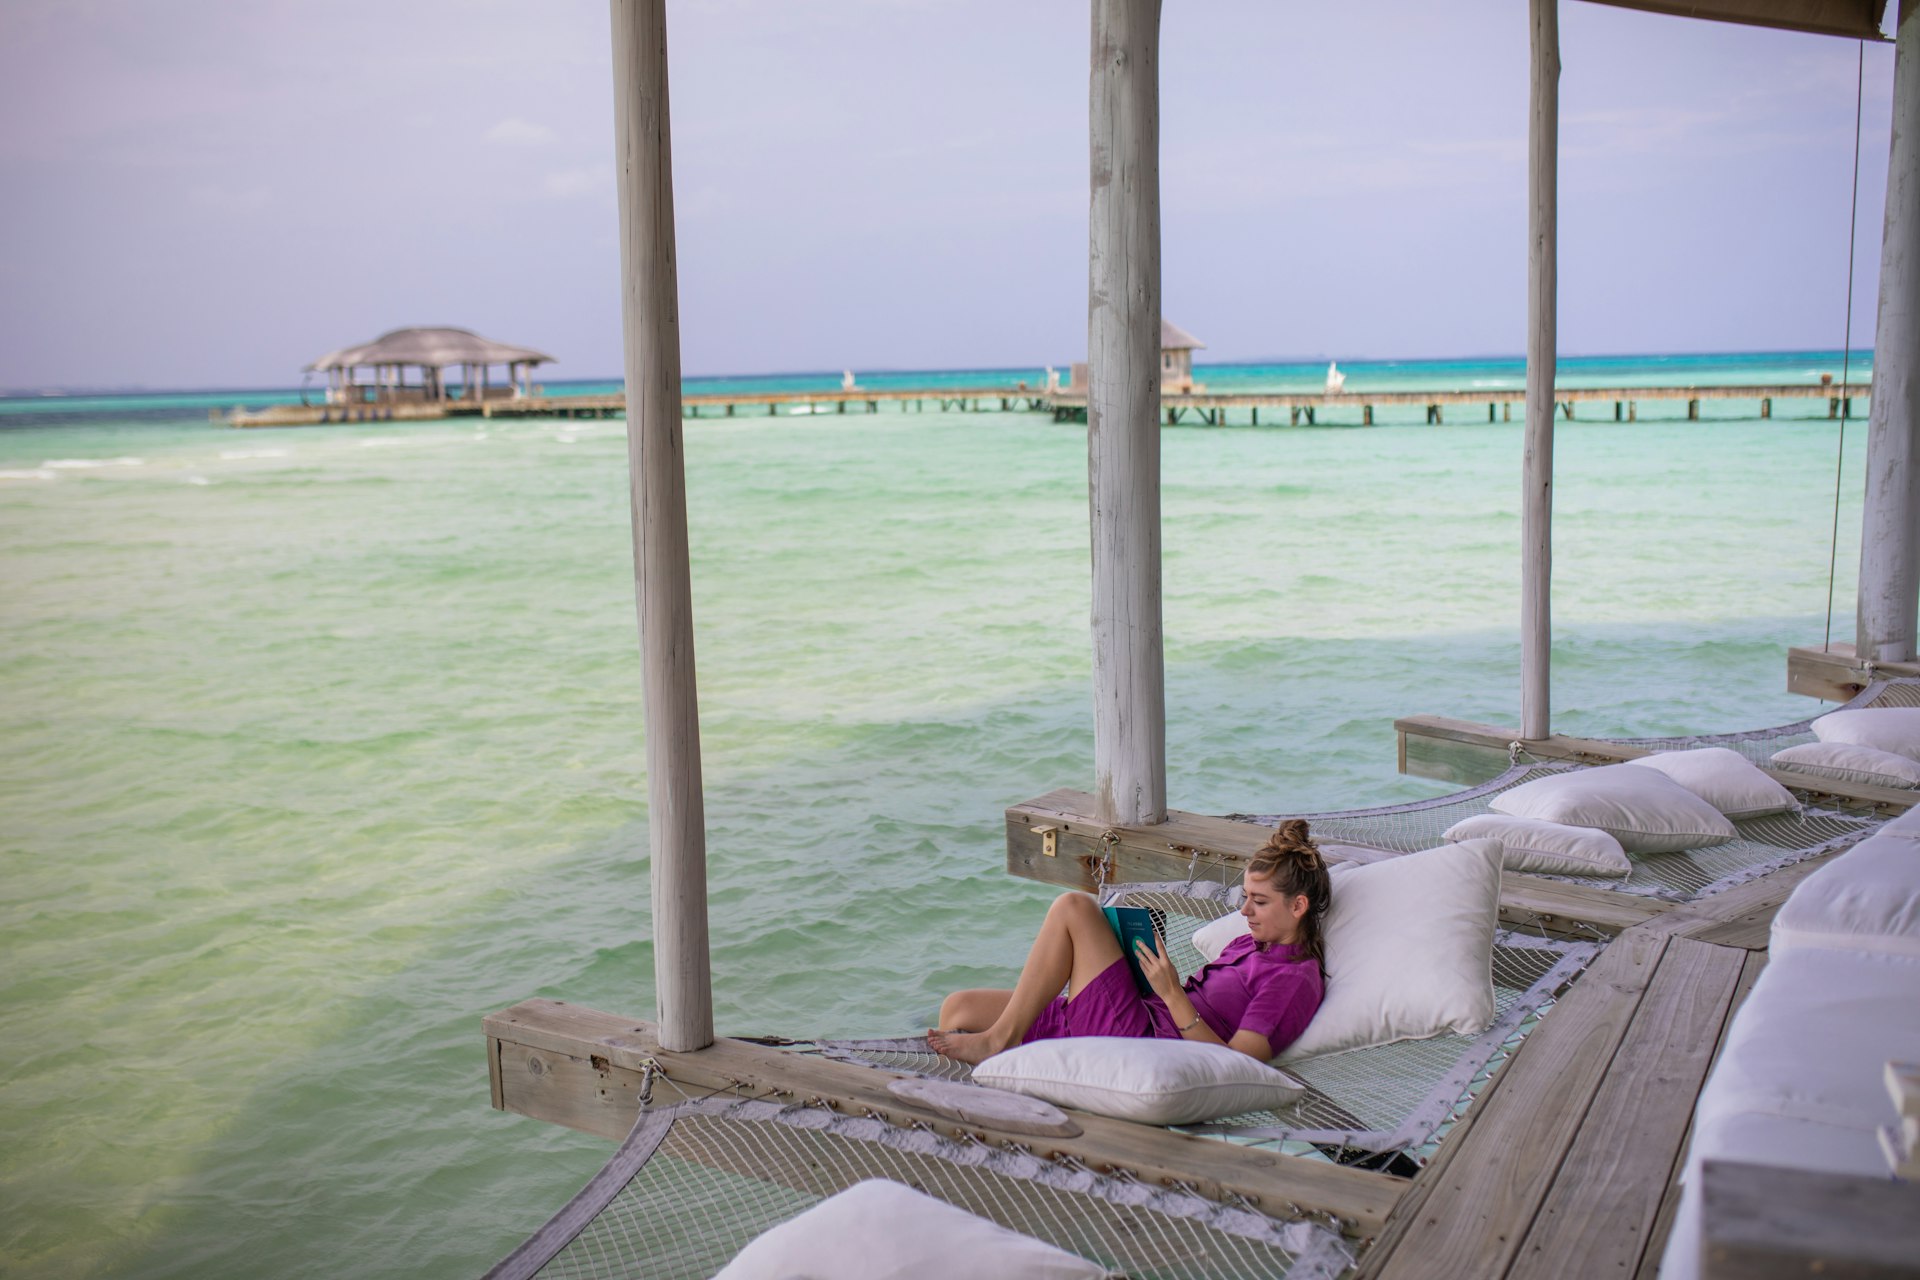 Woman reading a book on the veranda of an overwater bungalow in the Maldives